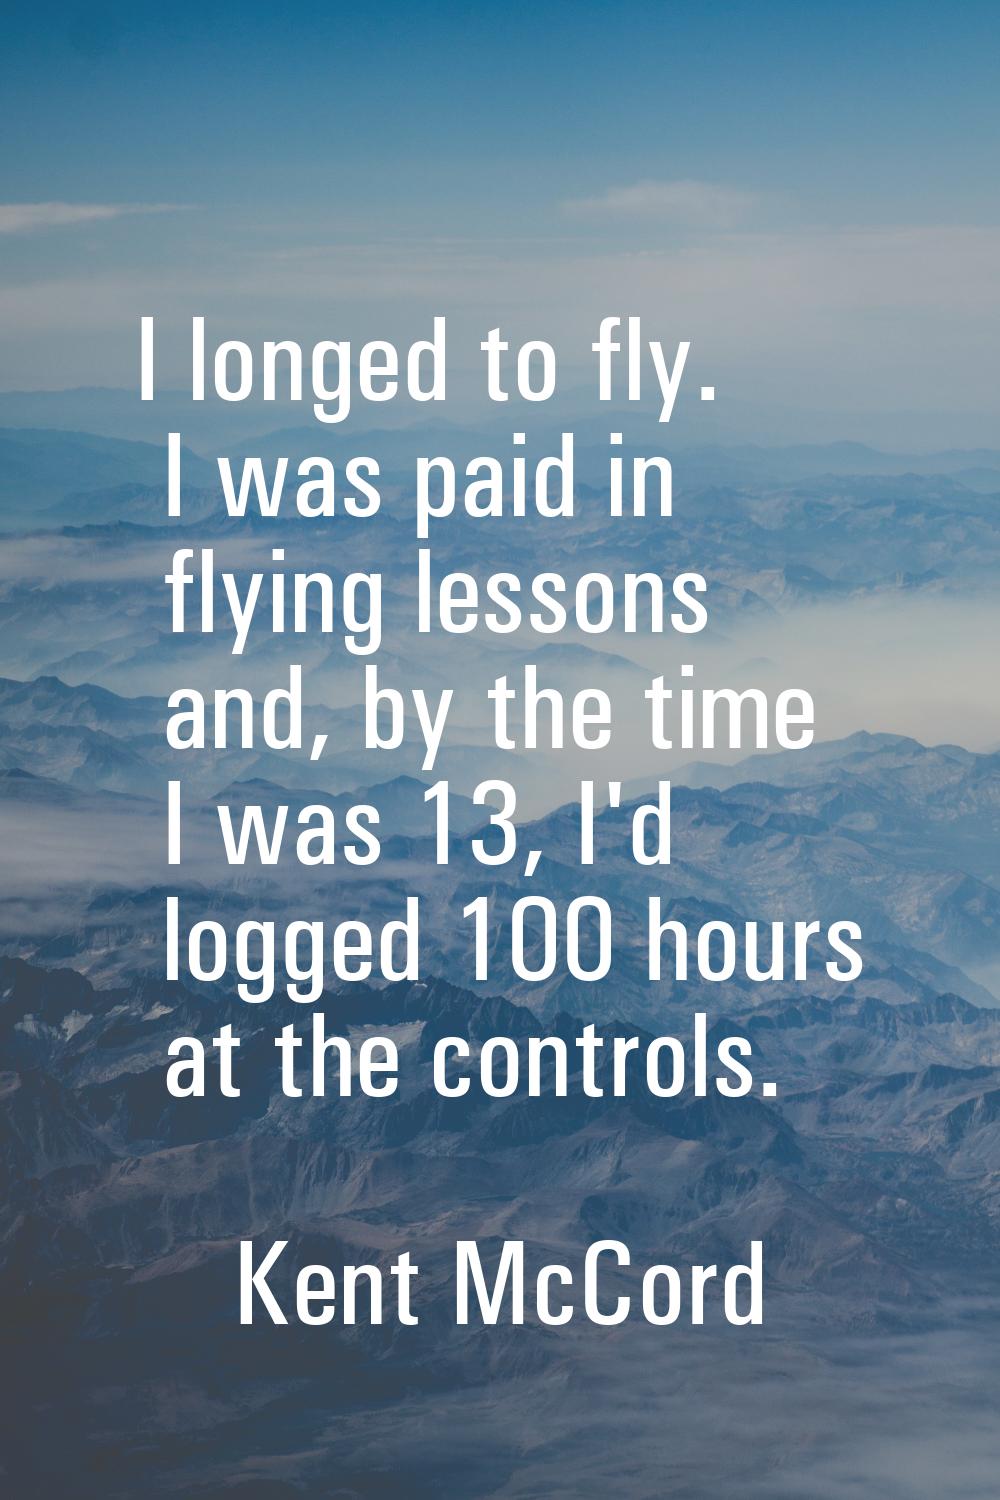 I longed to fly. I was paid in flying lessons and, by the time I was 13, I'd logged 100 hours at th